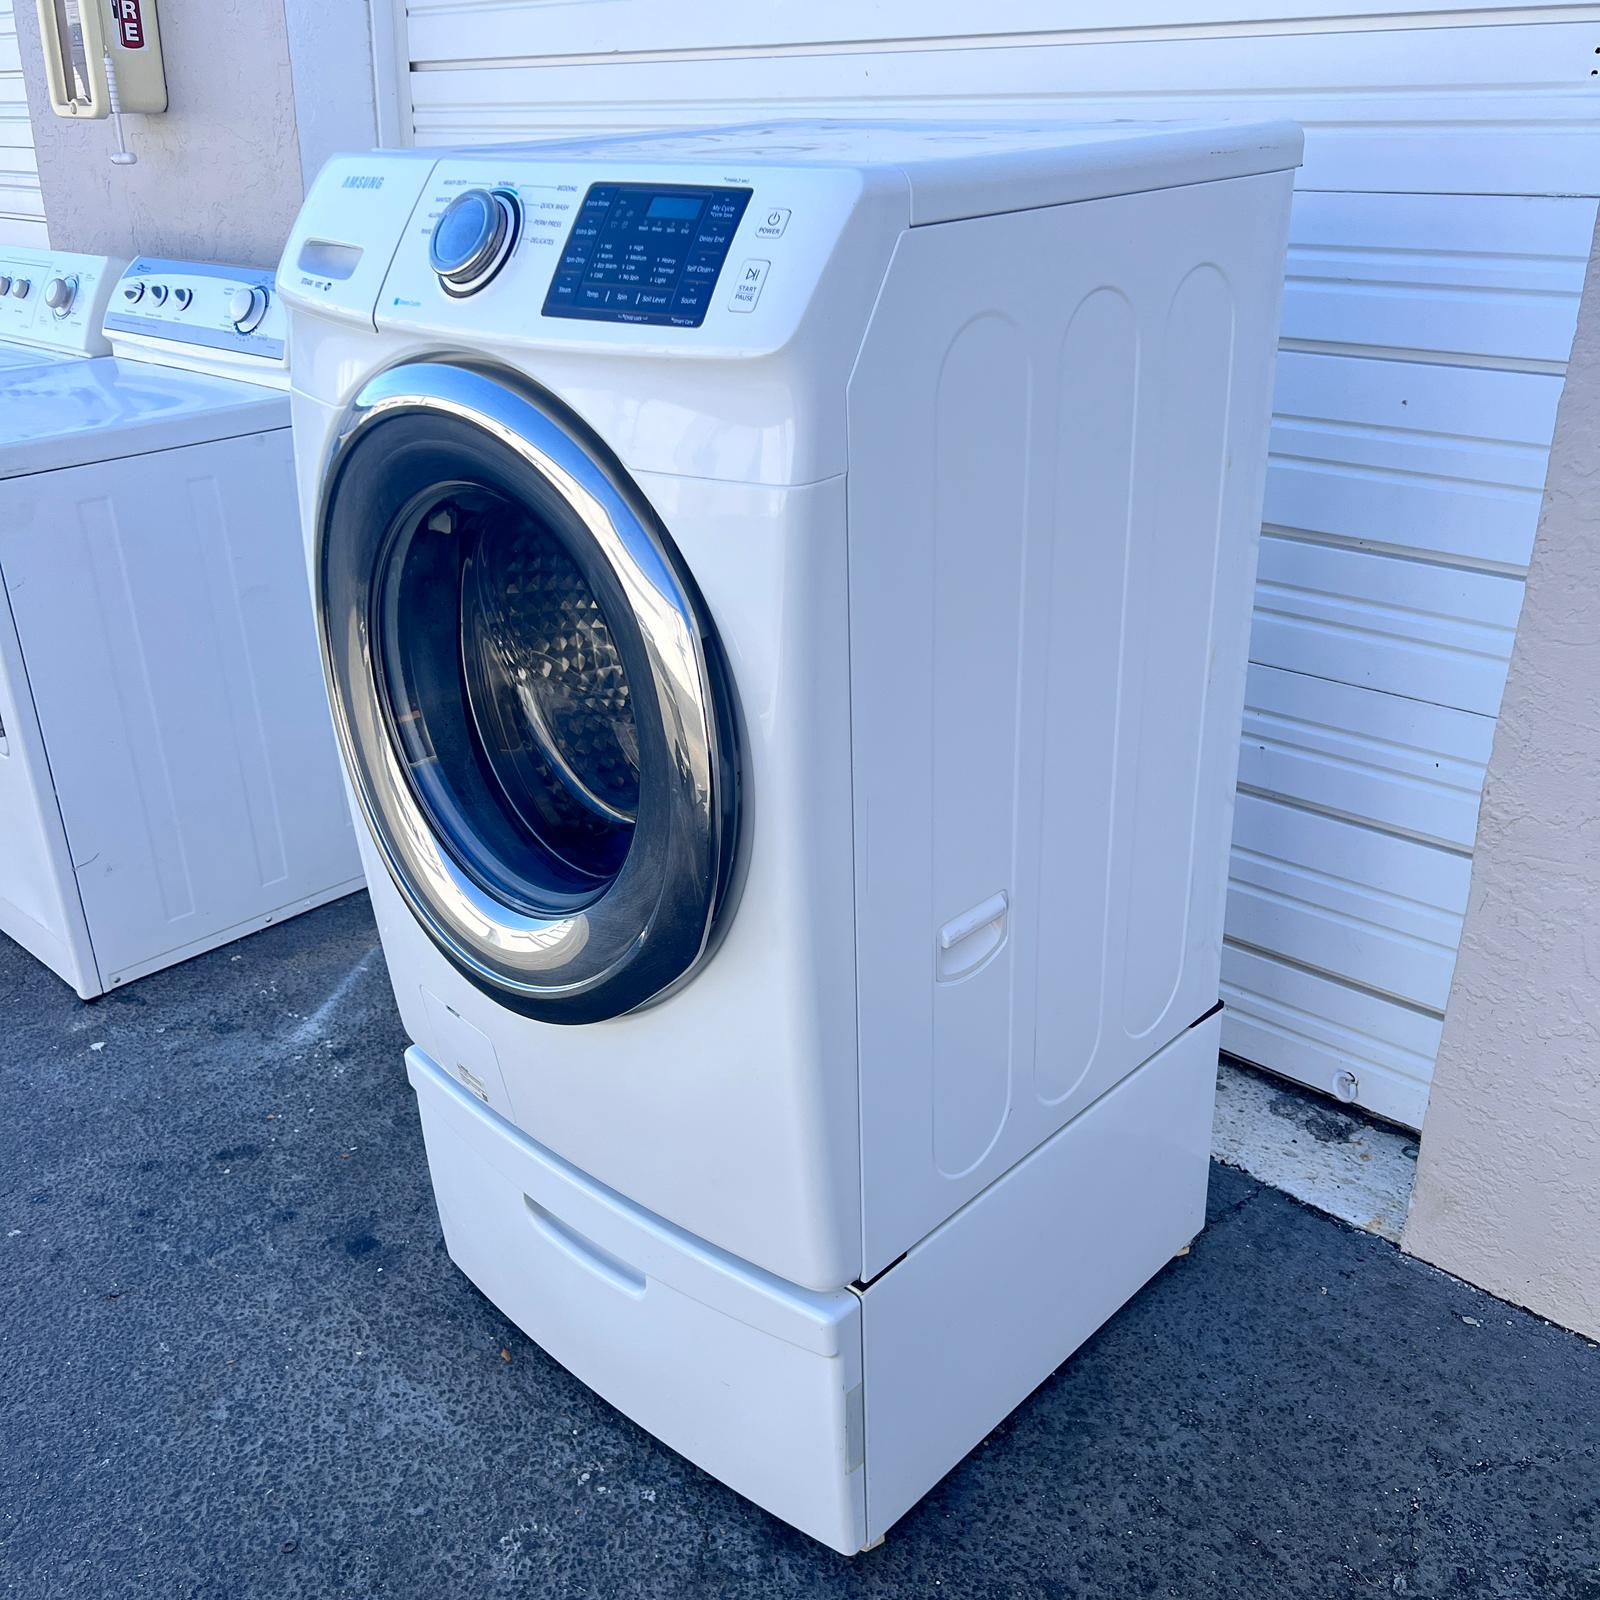 Samsung Washer Front Load with Pedestal